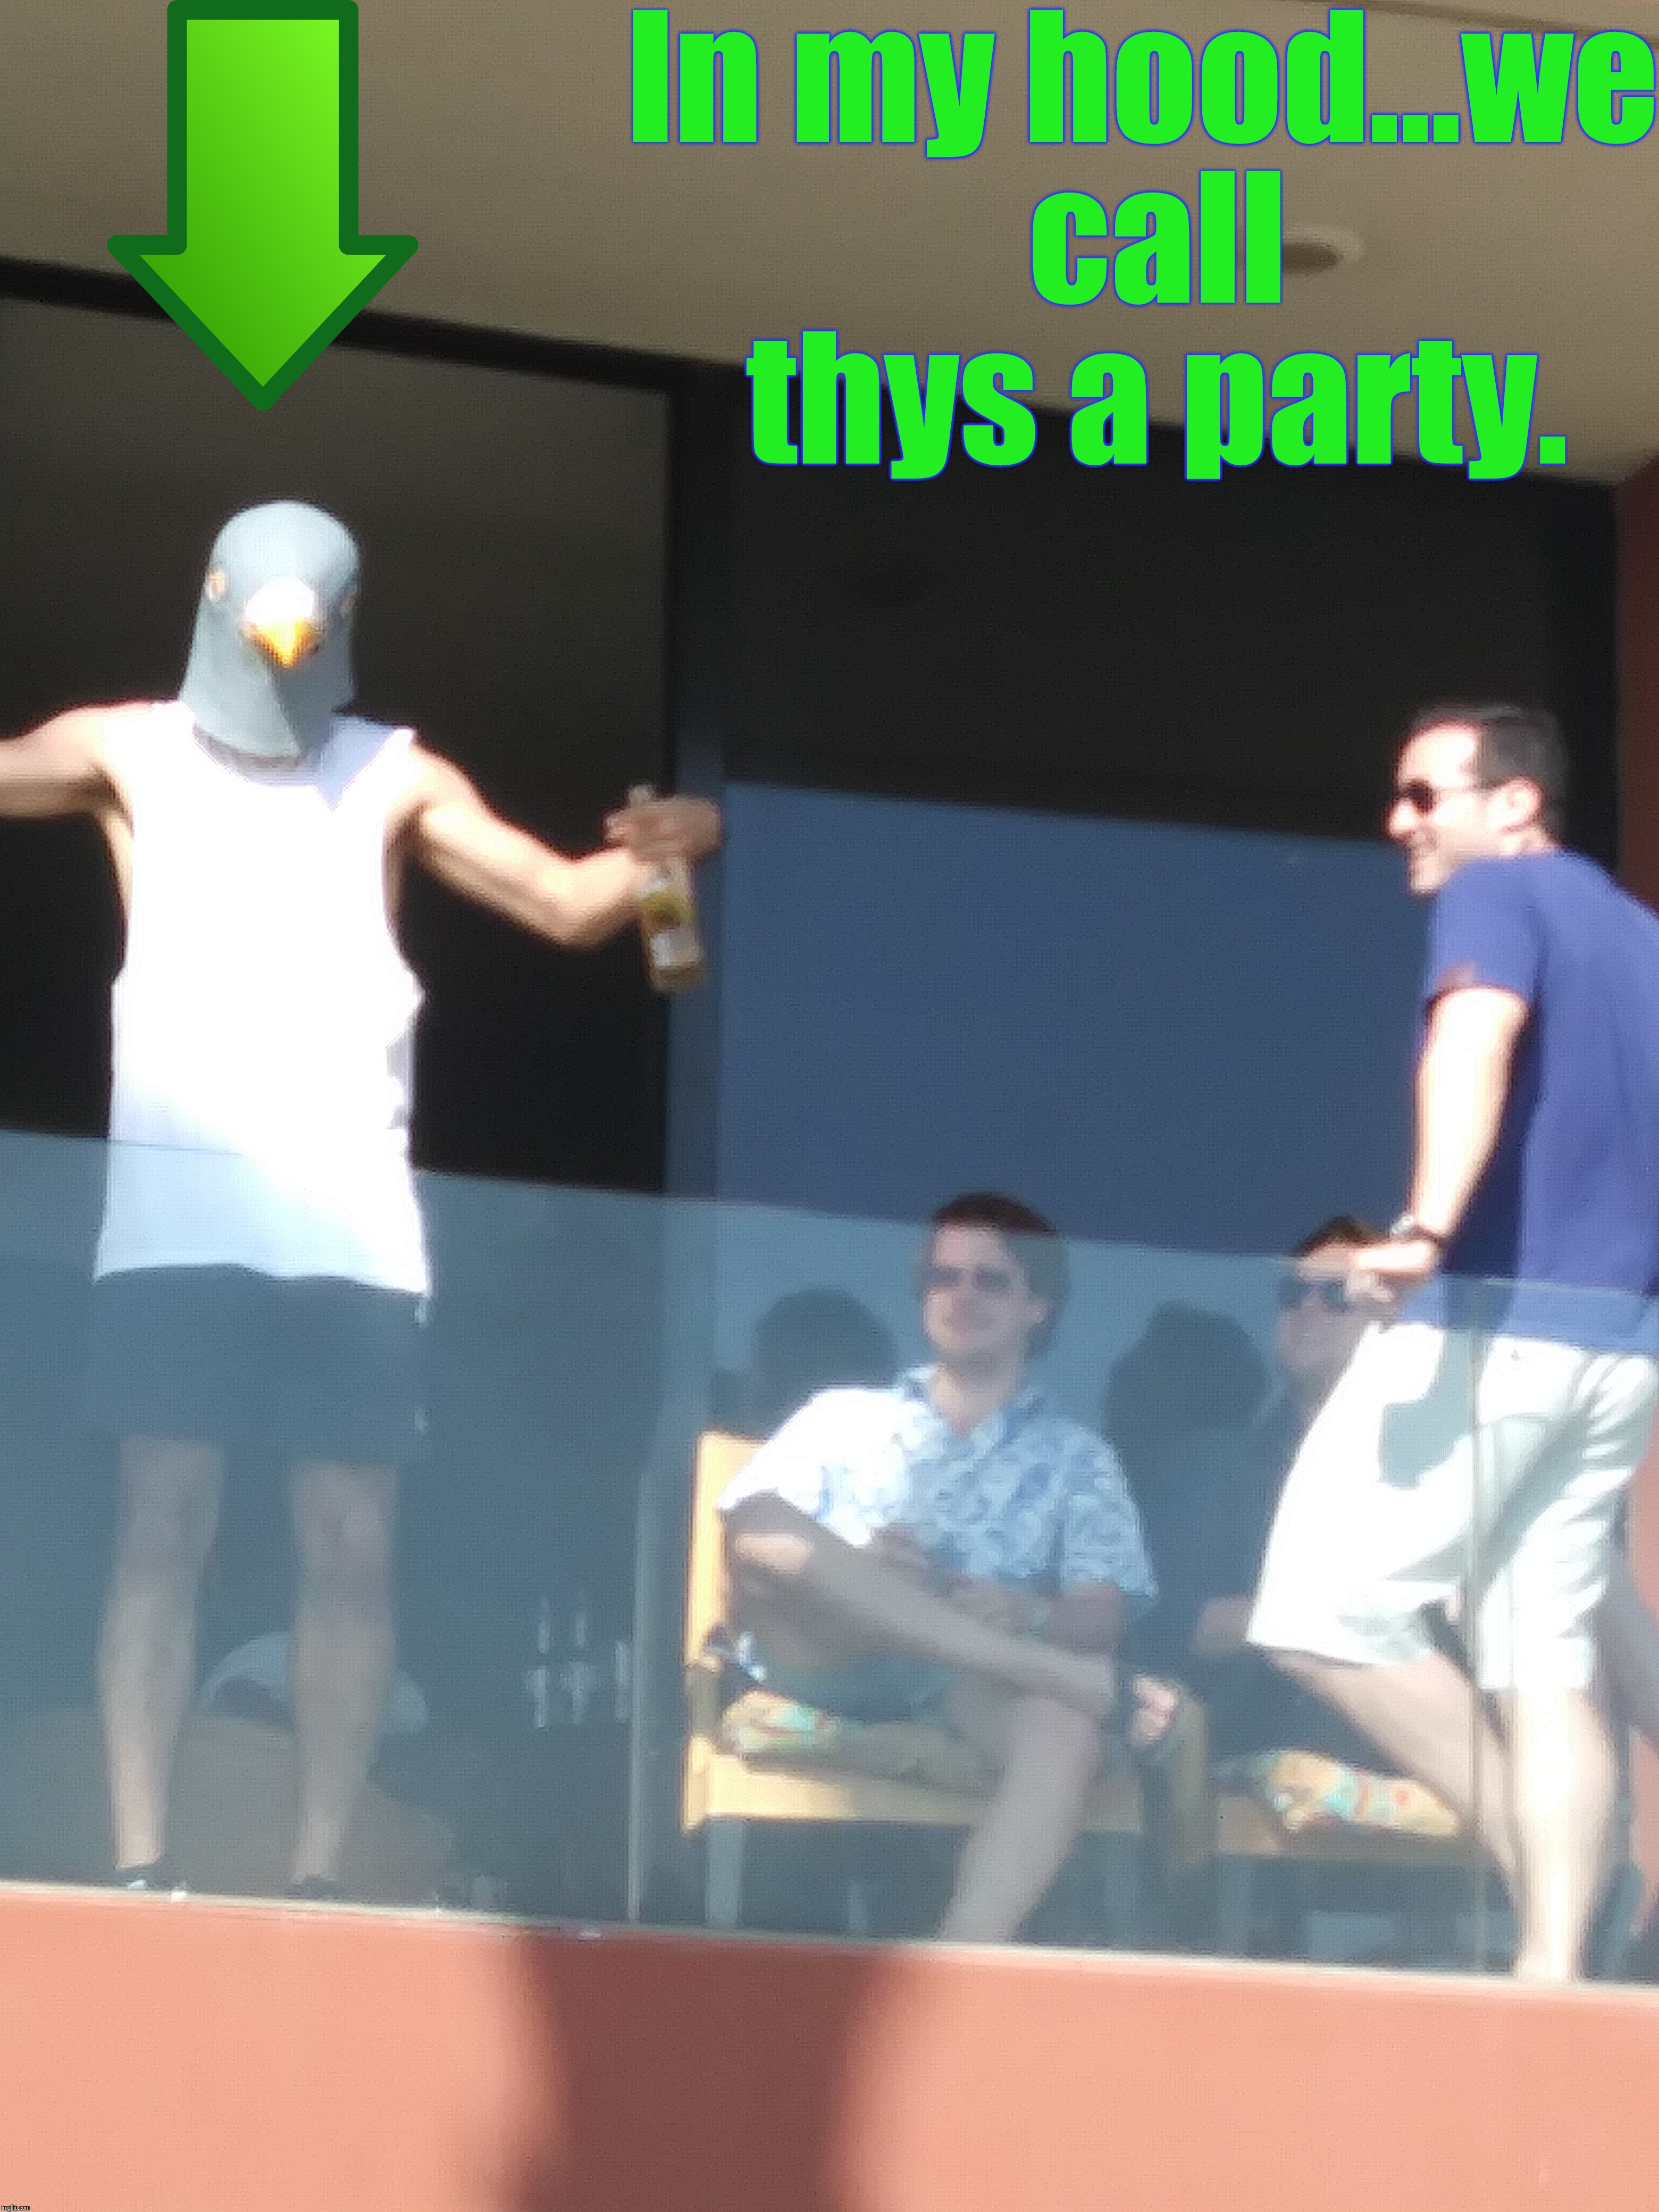 Y Que? |  In my hood...we call thys a party. | image tagged in y que,sexy party,pigeon,party animal,awkward party,funny | made w/ Imgflip meme maker